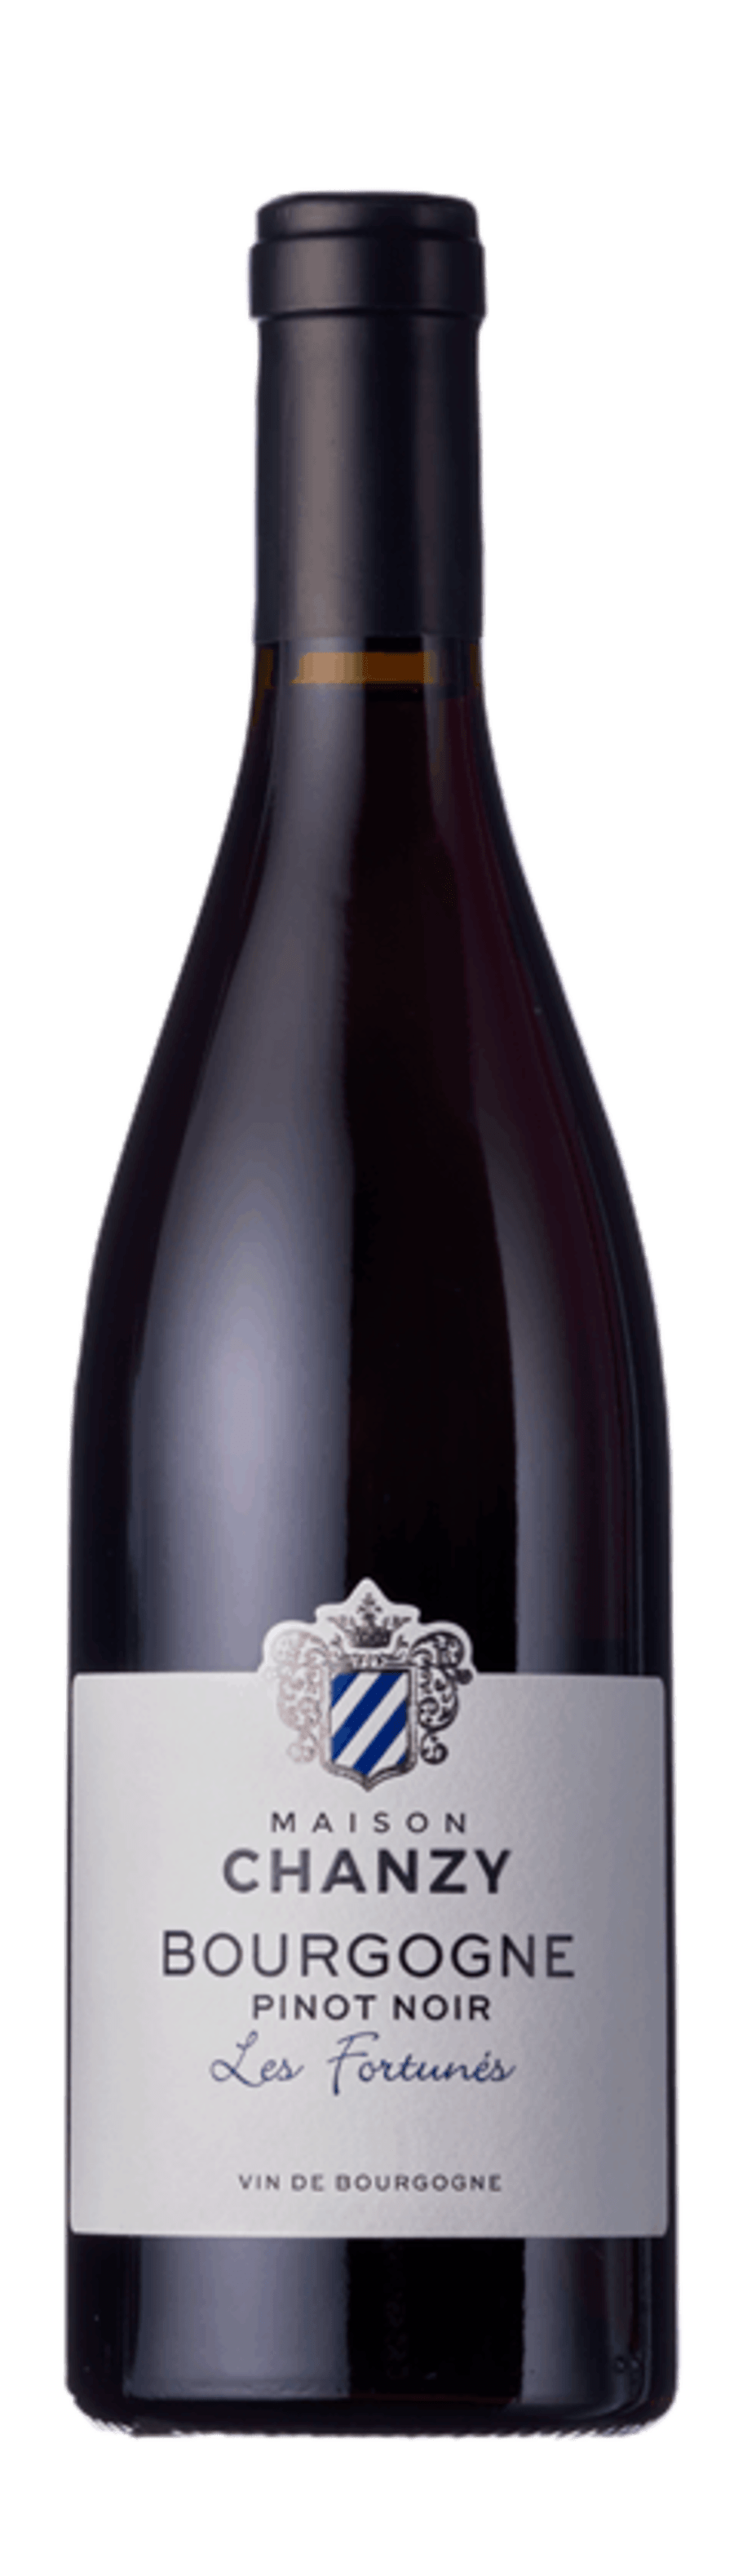 2021 Chanzy bourgogne pinot noir les fortunes 750 ml